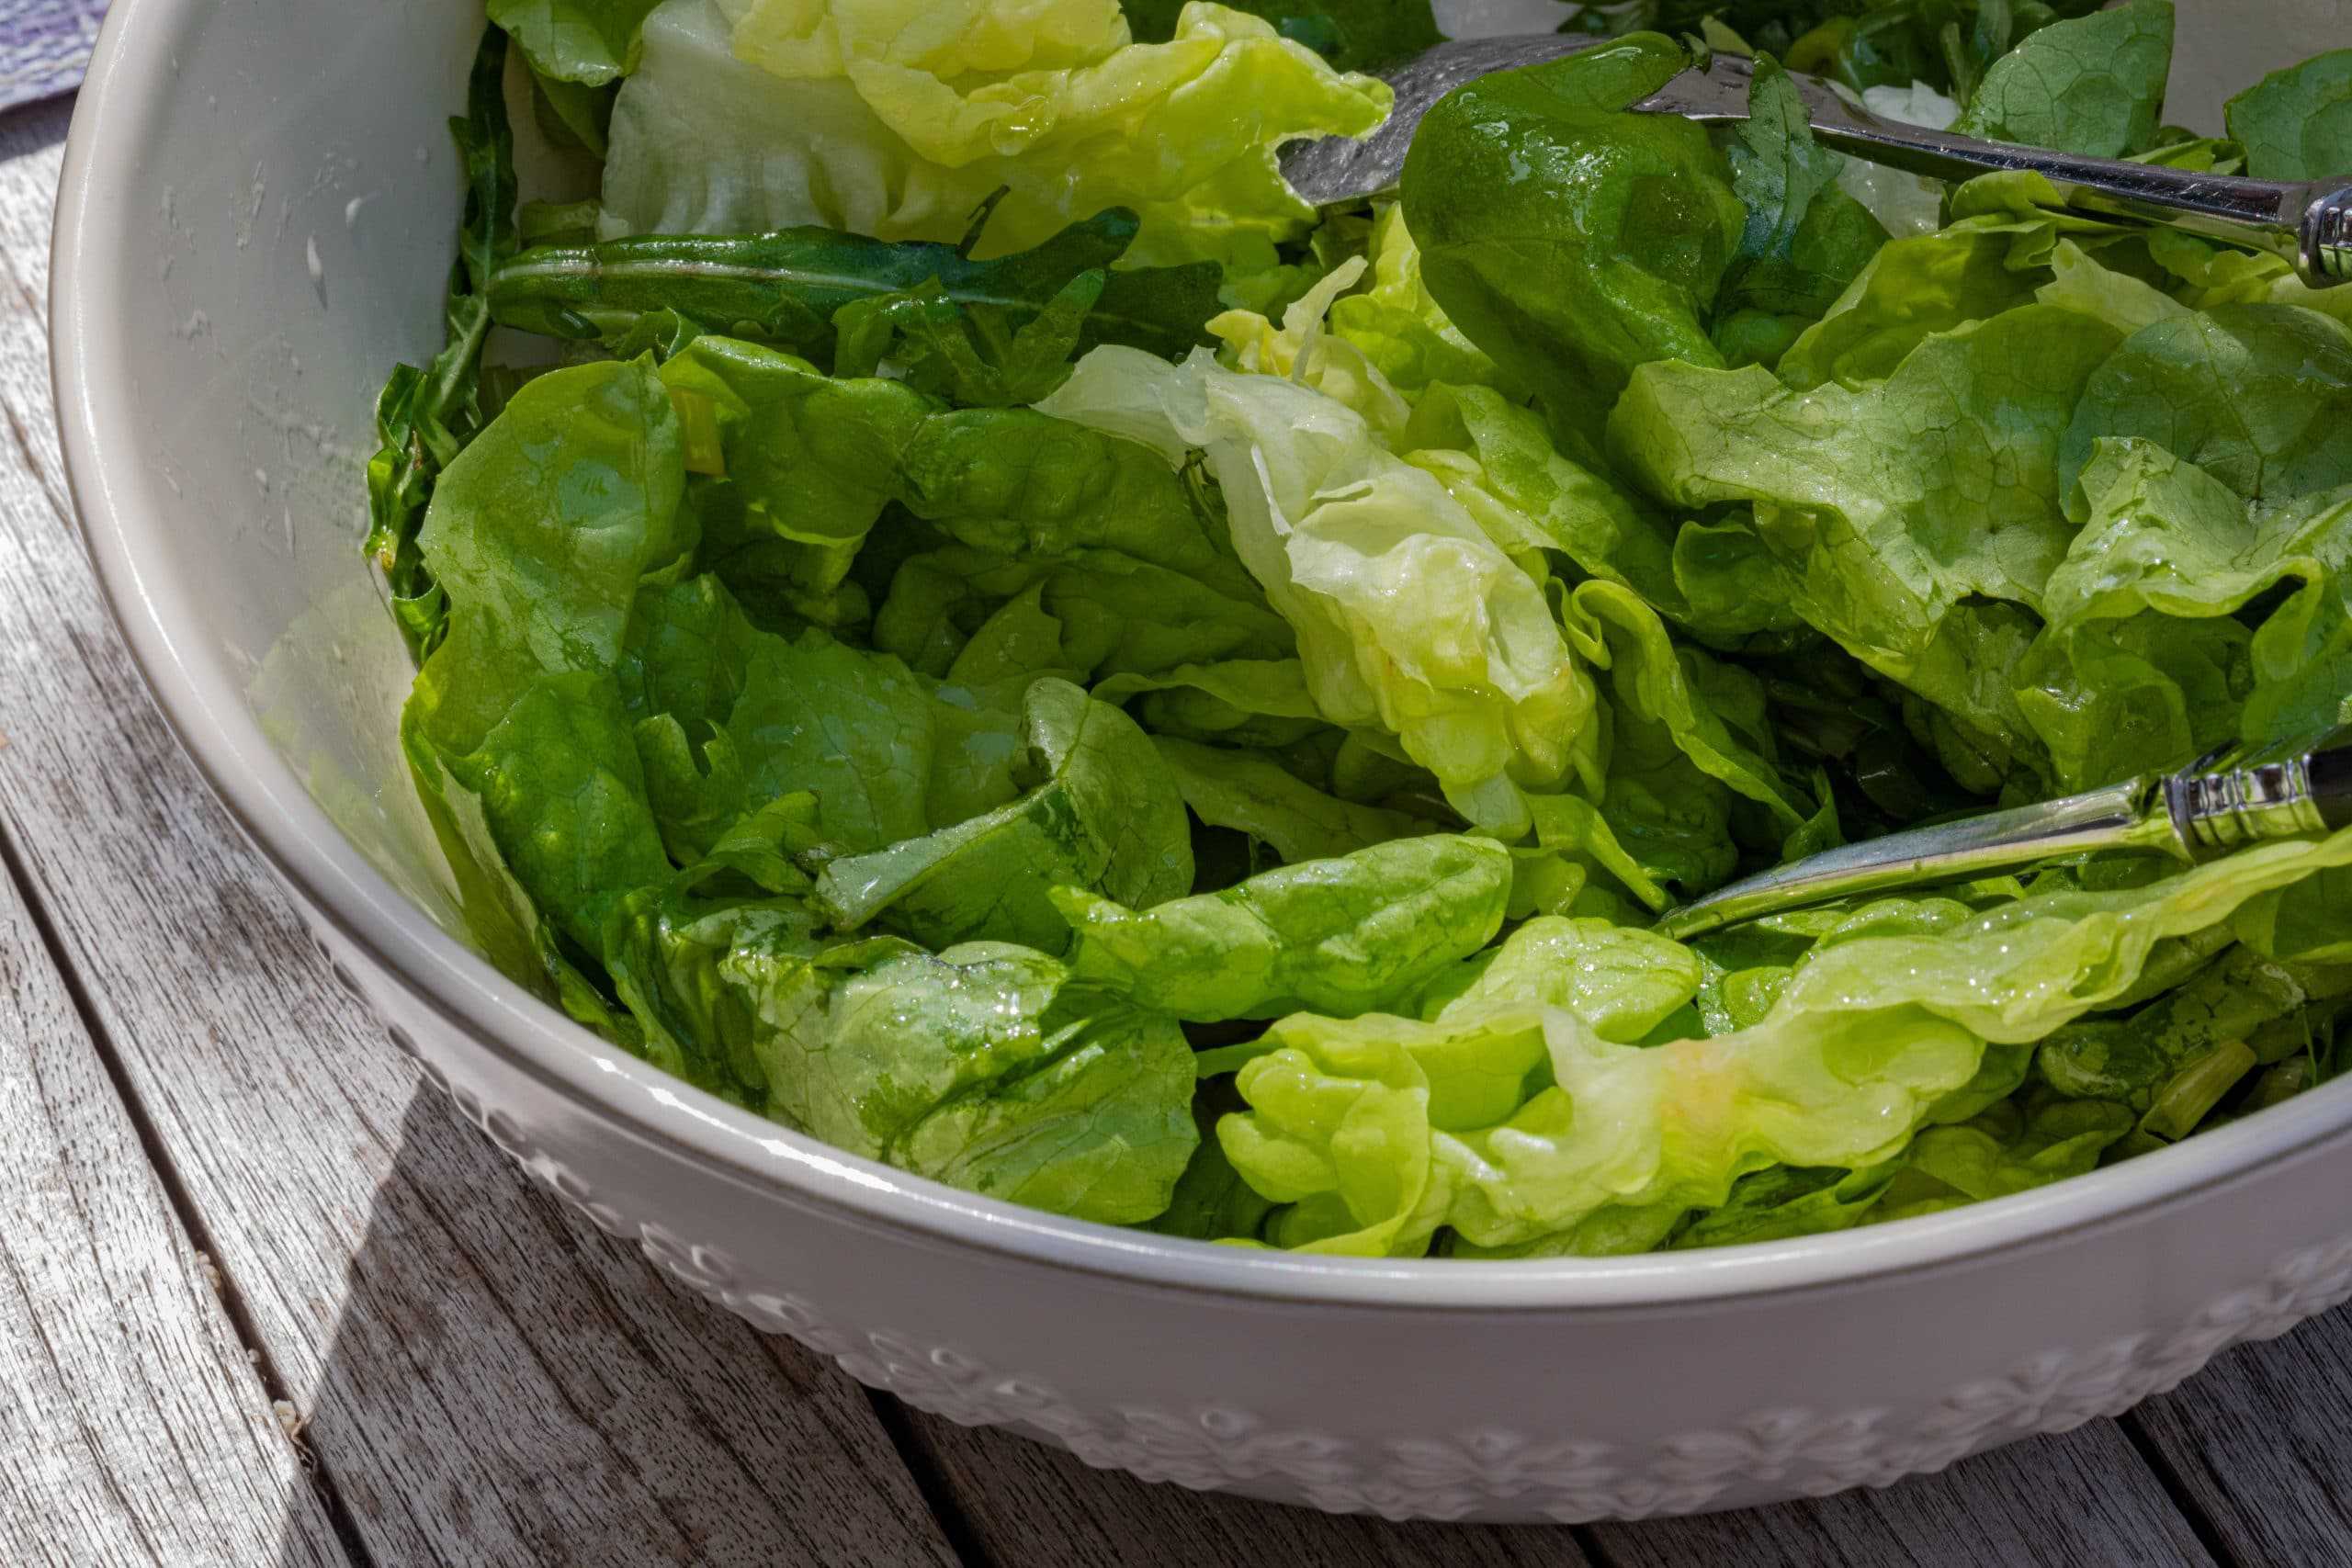 How To Defrost Your Lettuce